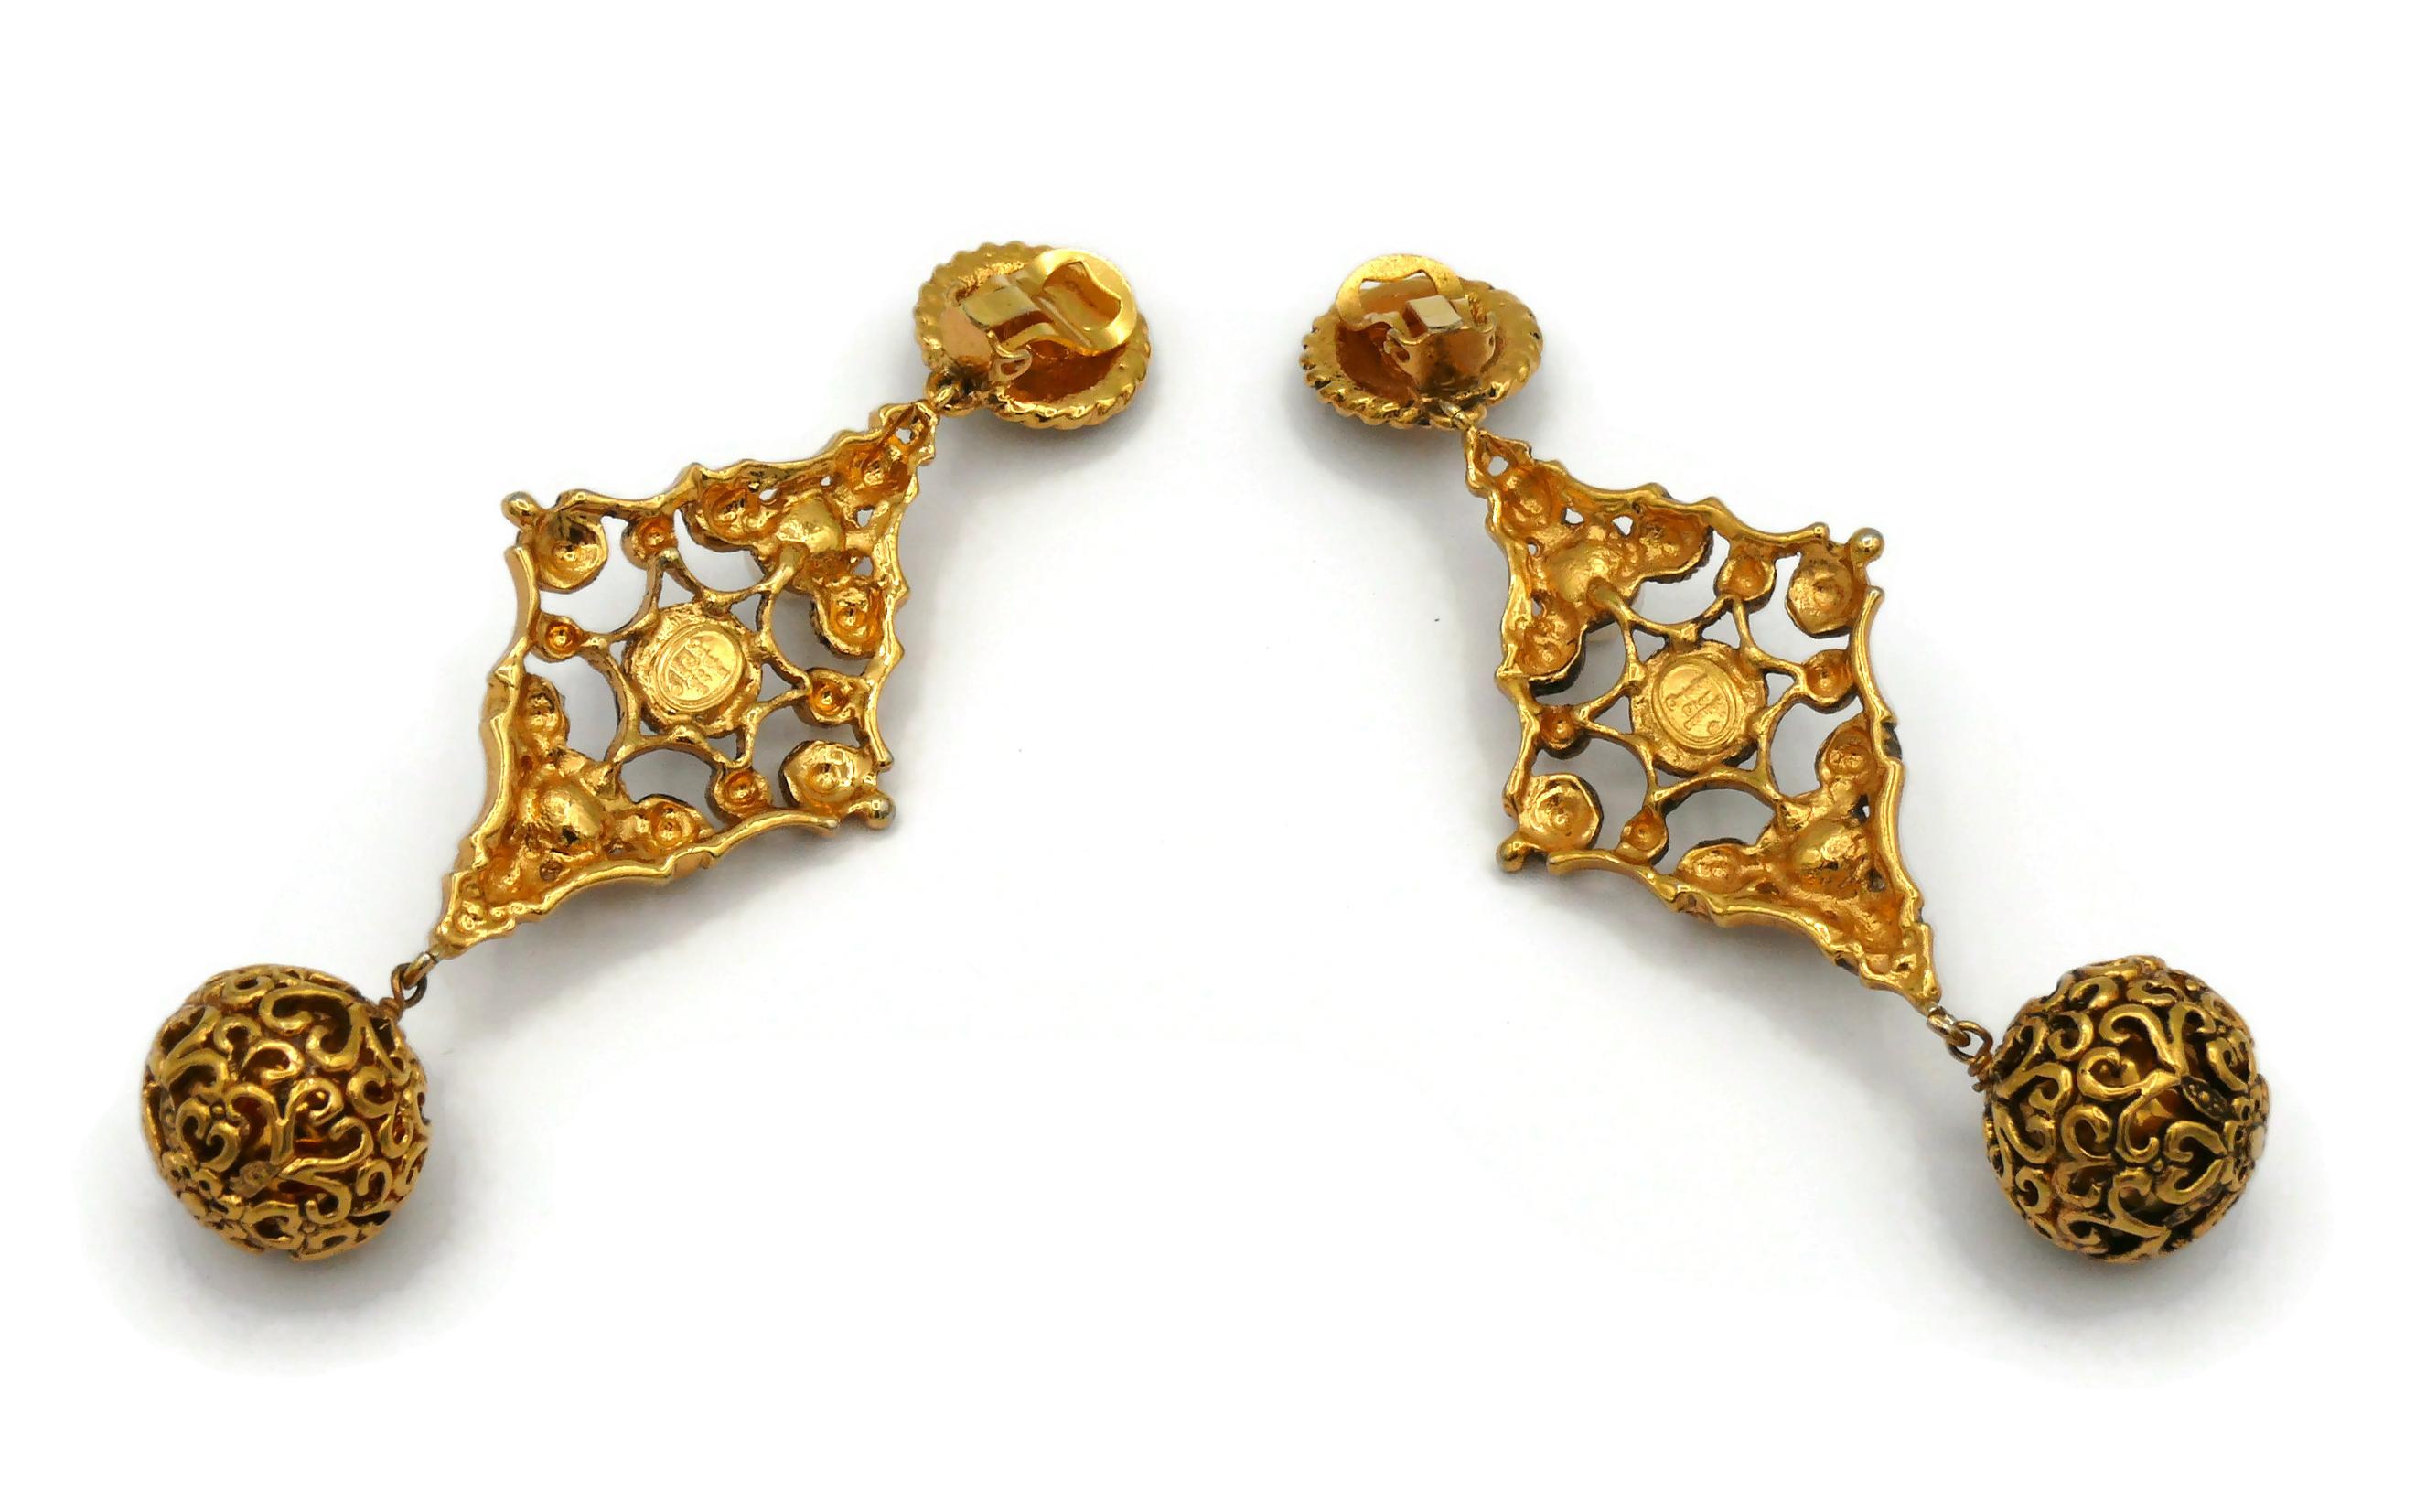 CHRISTIAN DIOR Boutique Vintage Etruscan Inspired Dangling Earrings In Good Condition For Sale In Nice, FR